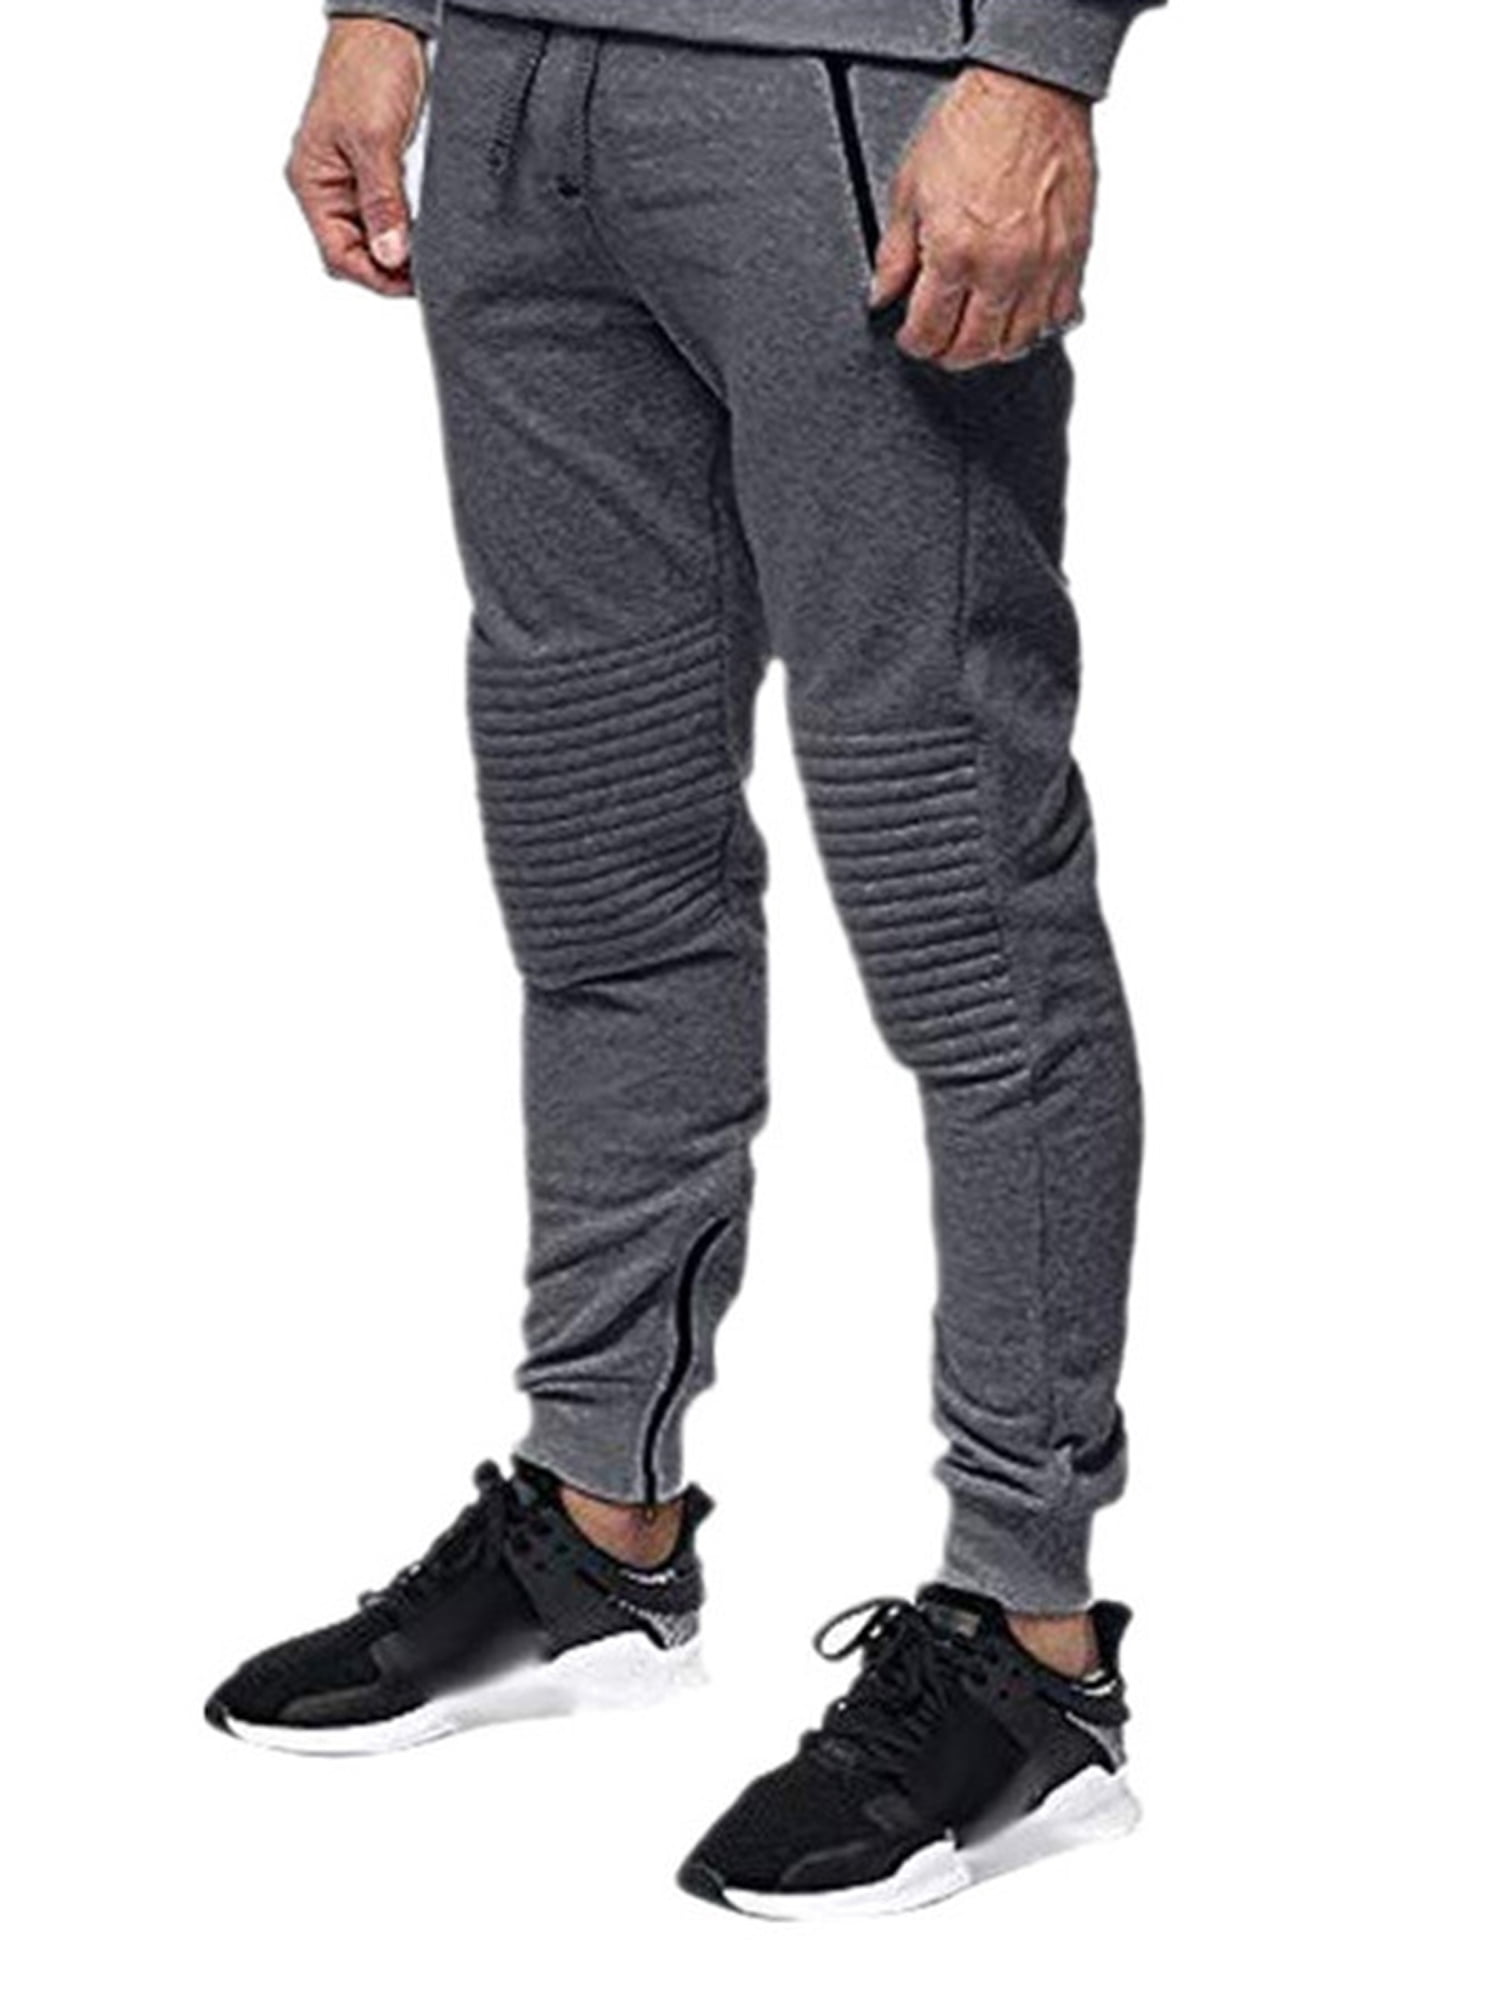 Wodstyle - Men's Athletic Joggers Drawstring Casual Sports Zipper Gym ...